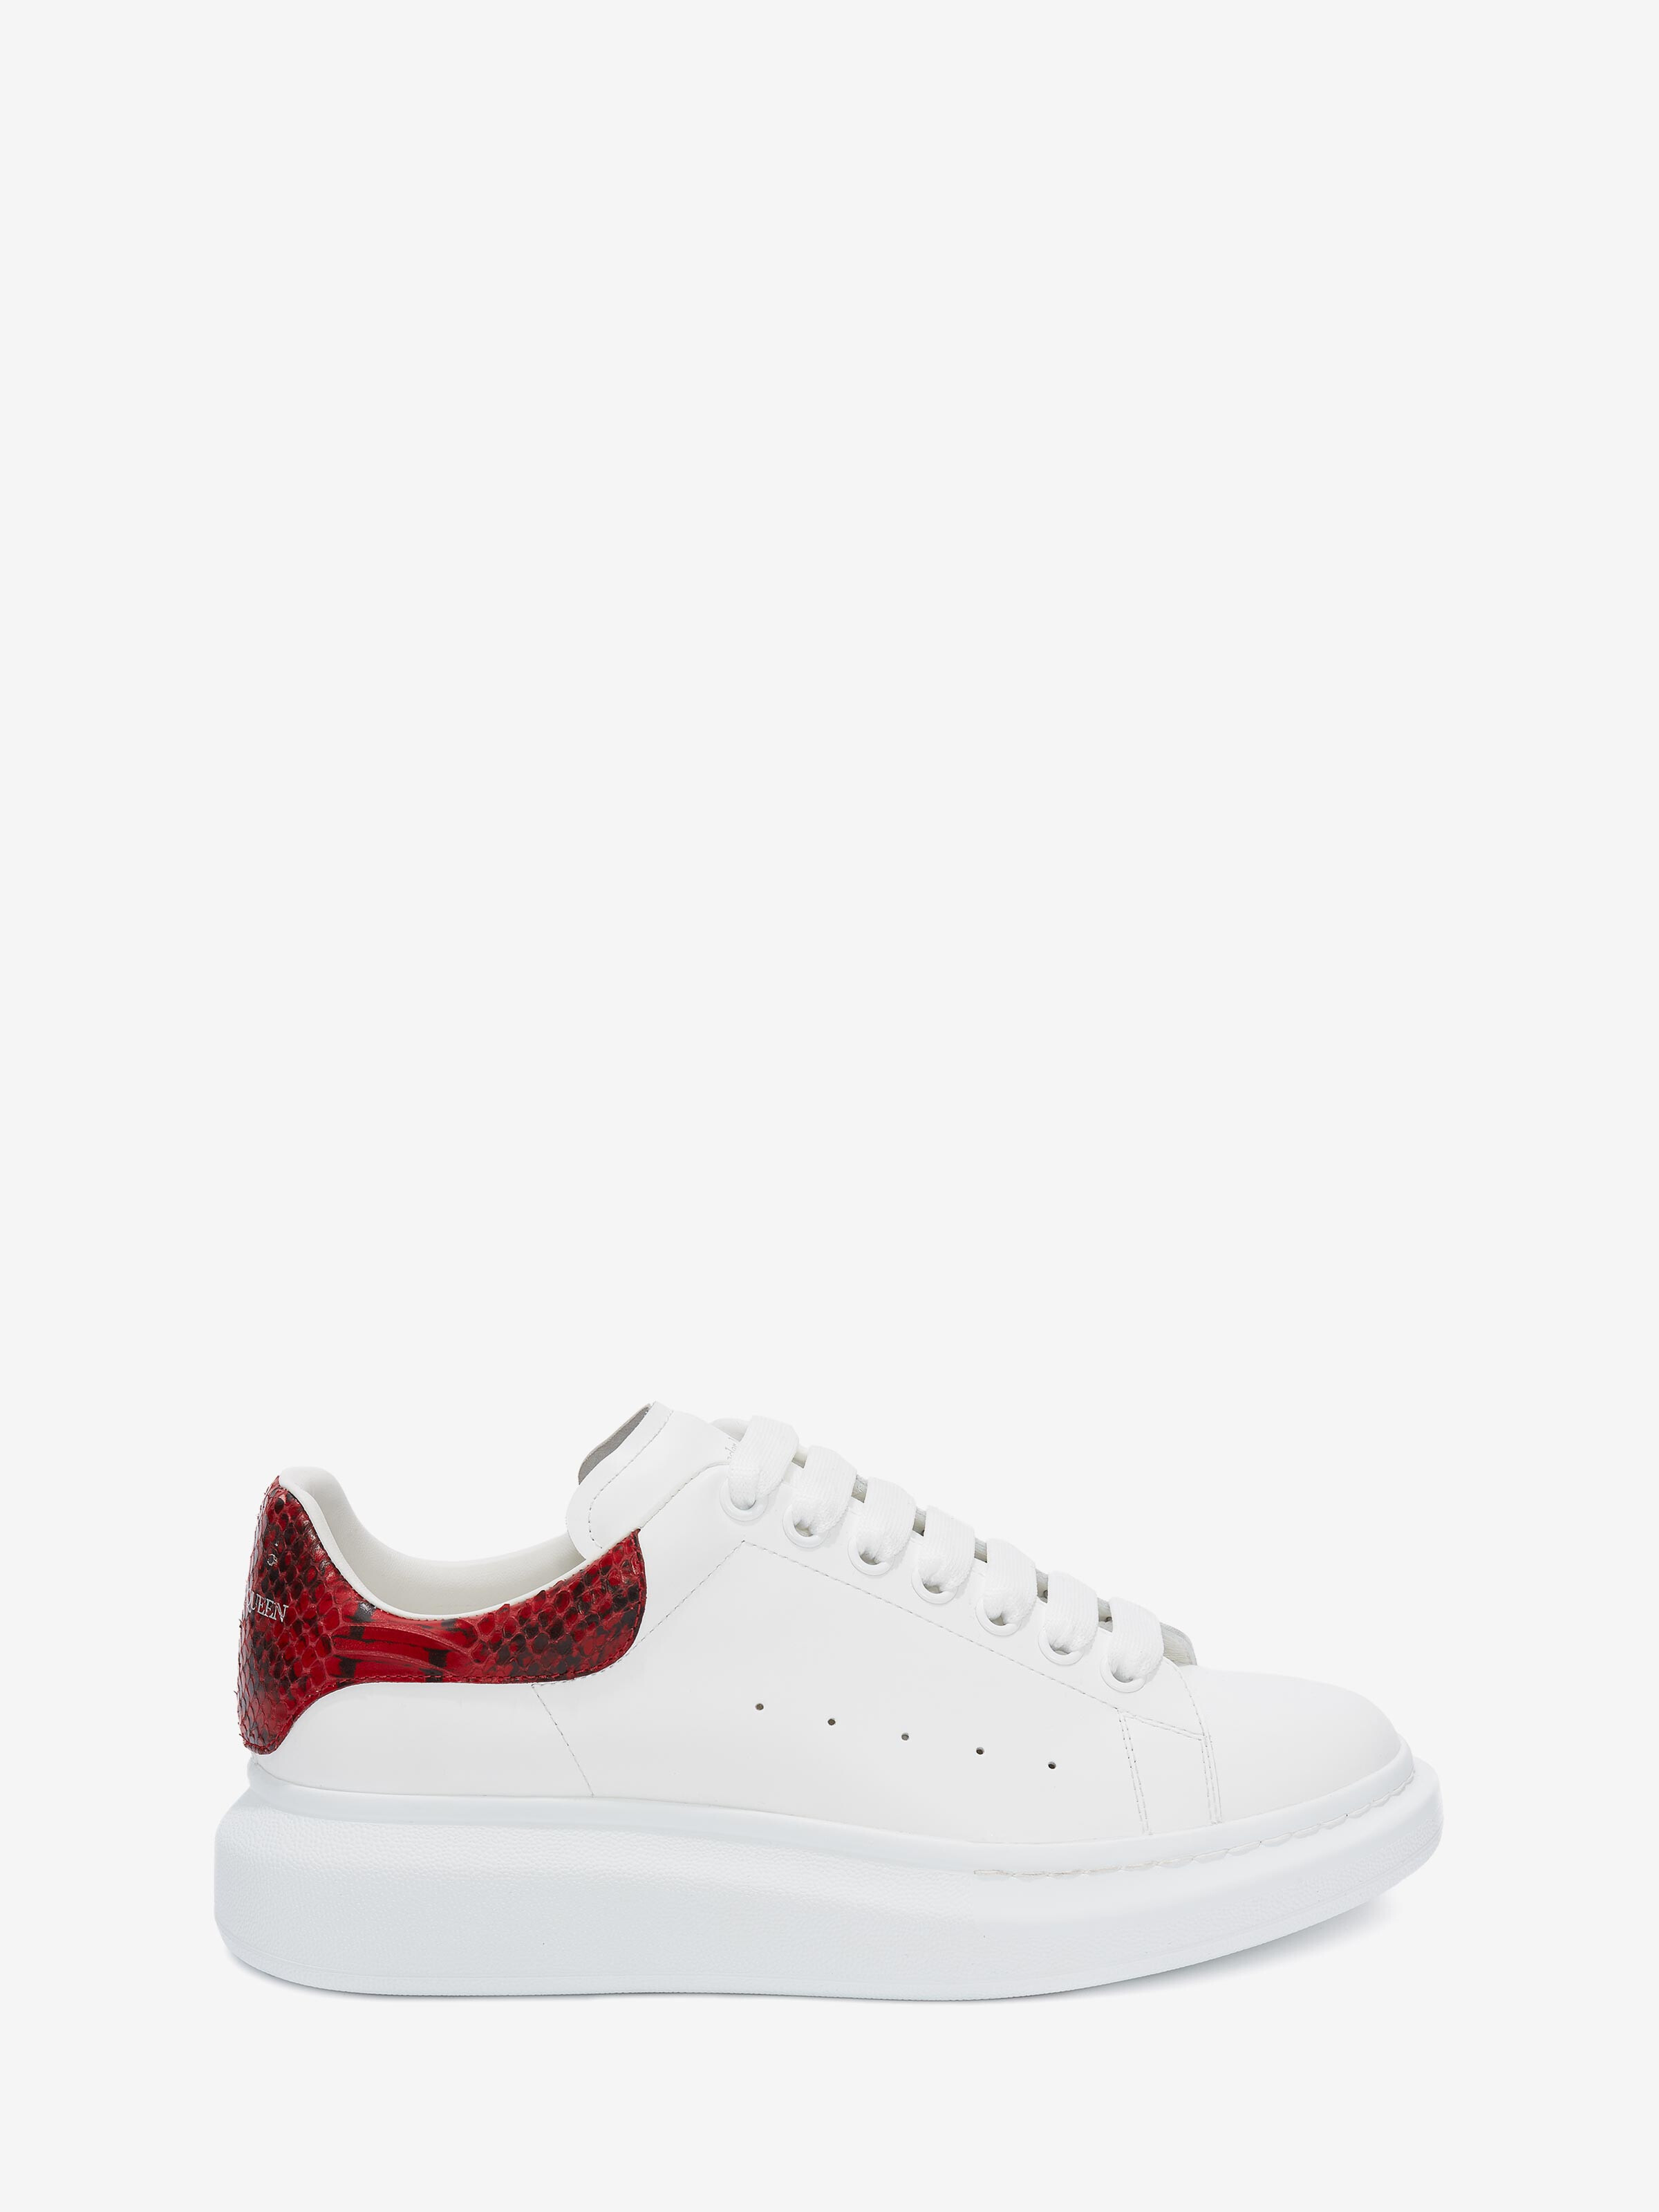 alexander mcqueen sneakers white and red